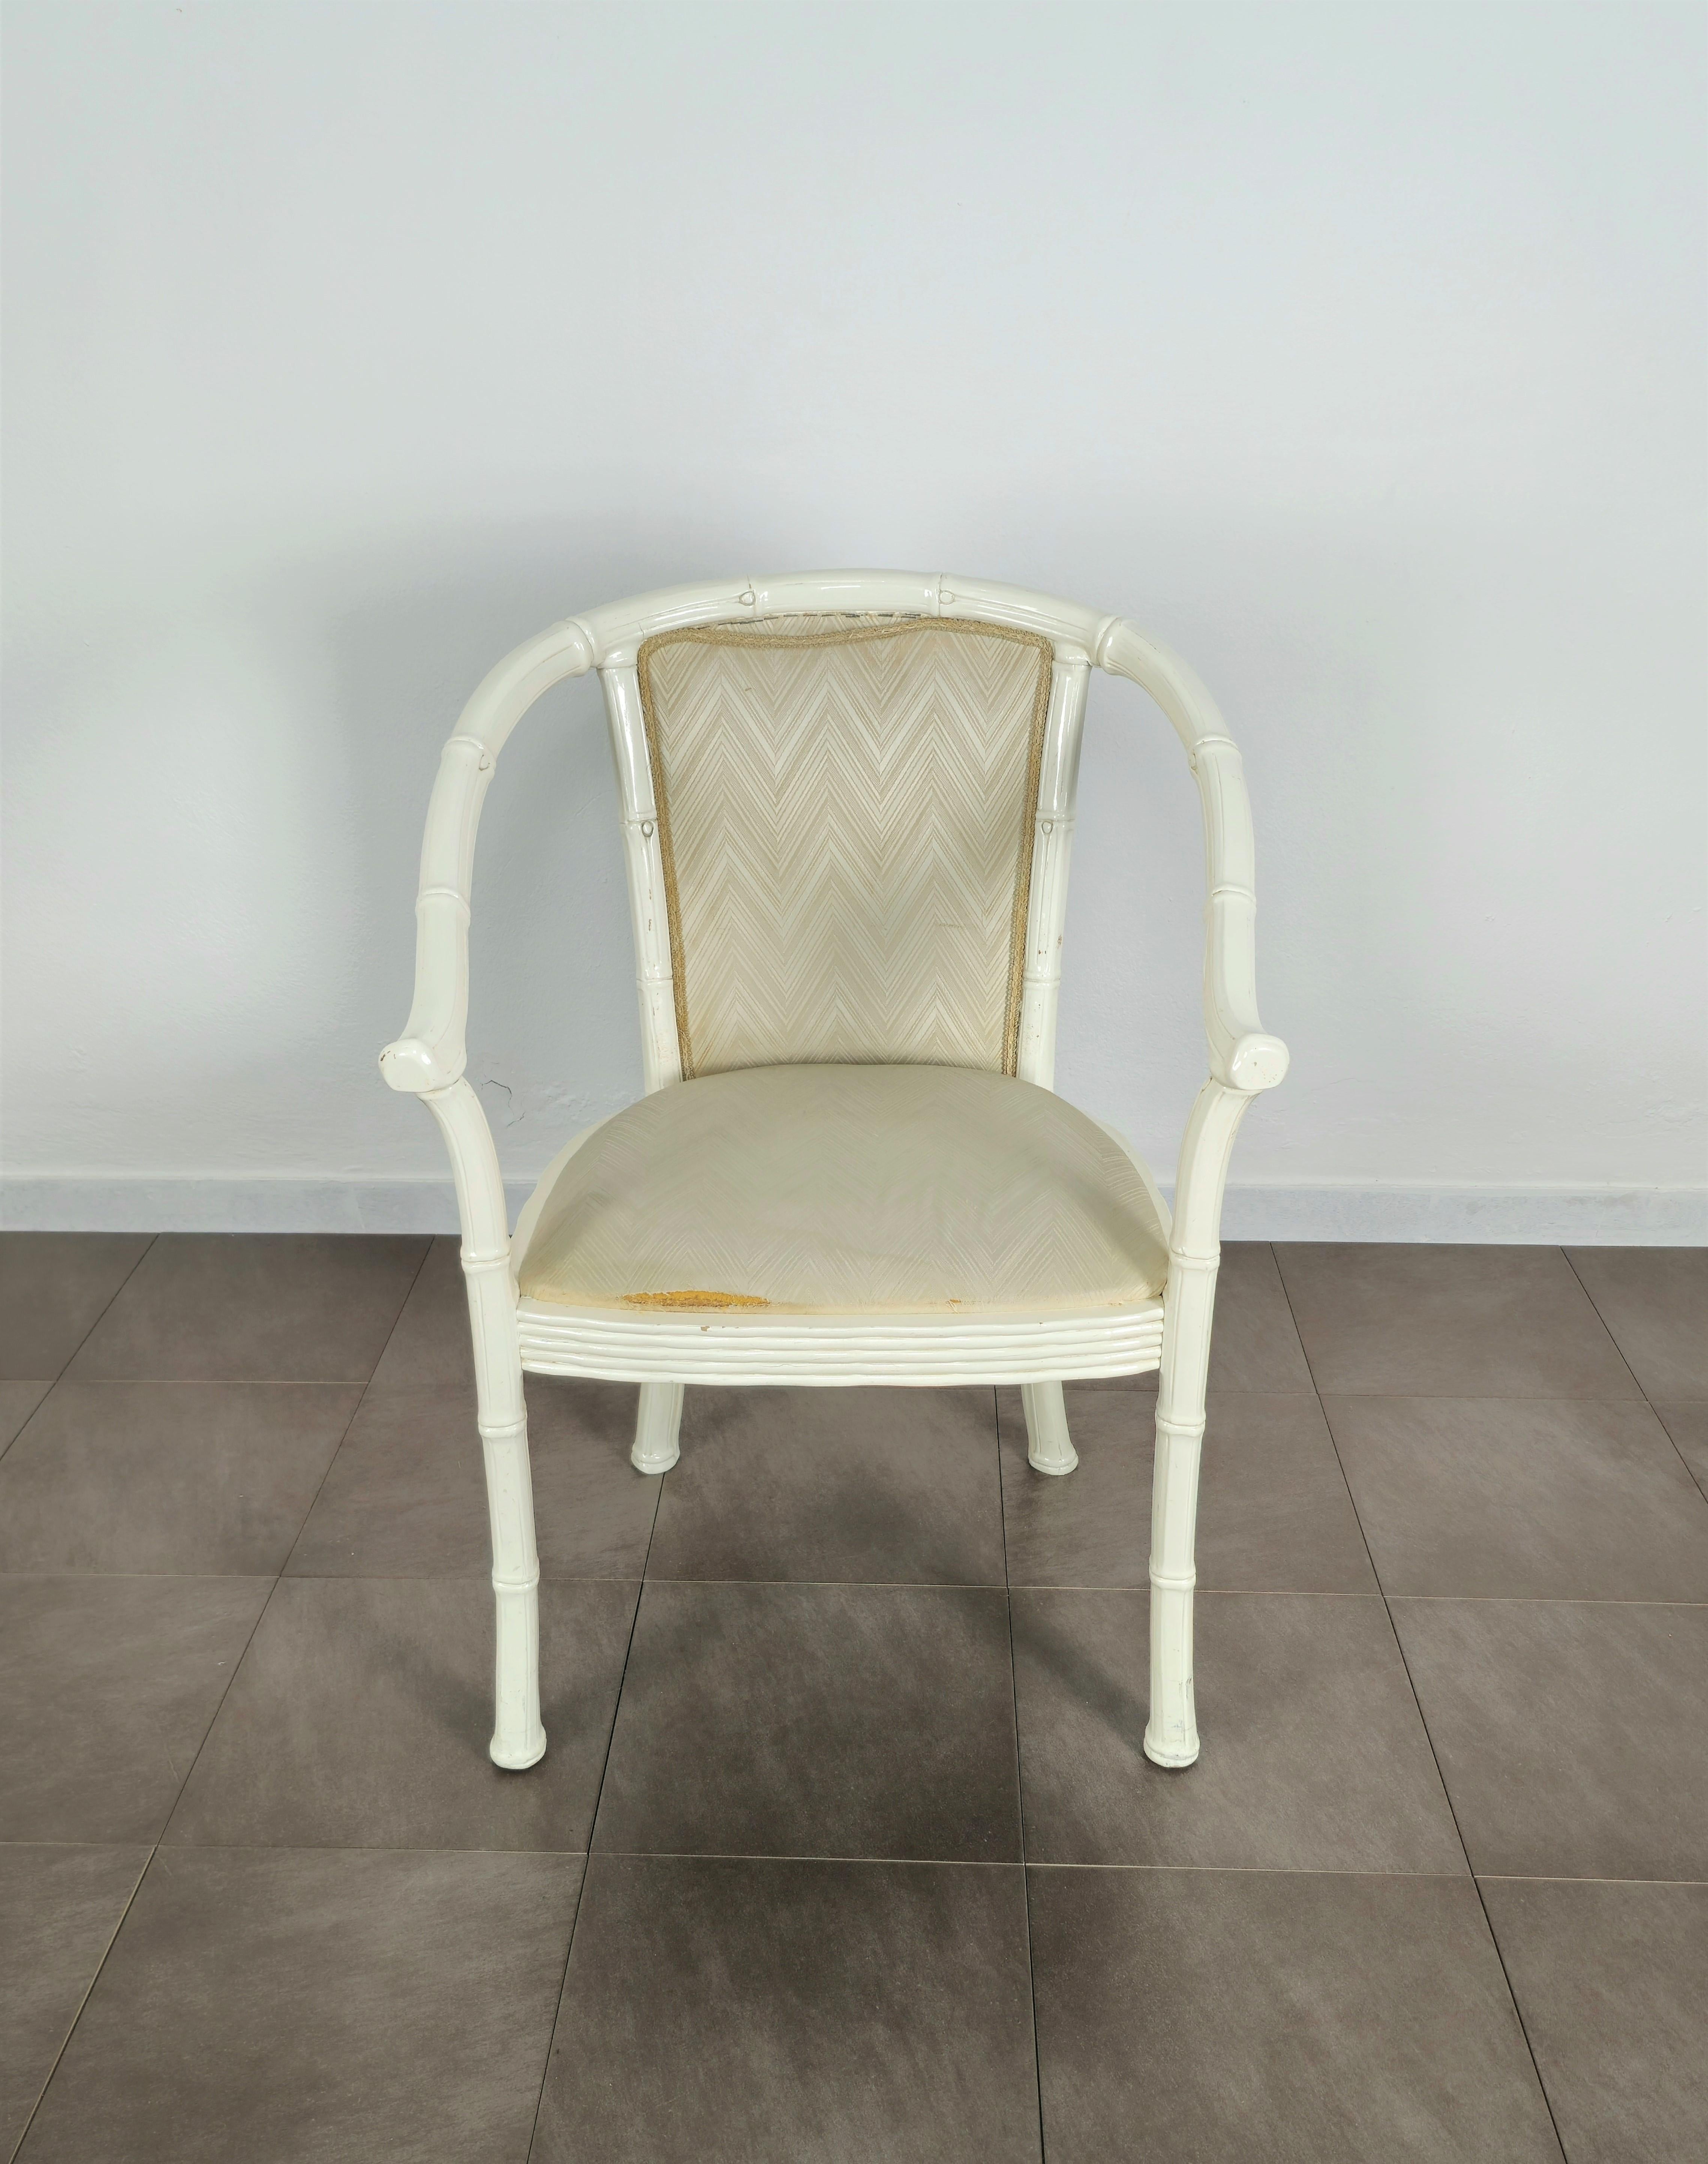 Midcentury Chair White Enamelled Bamboo Fabric Italian Design, 1960s For Sale 1